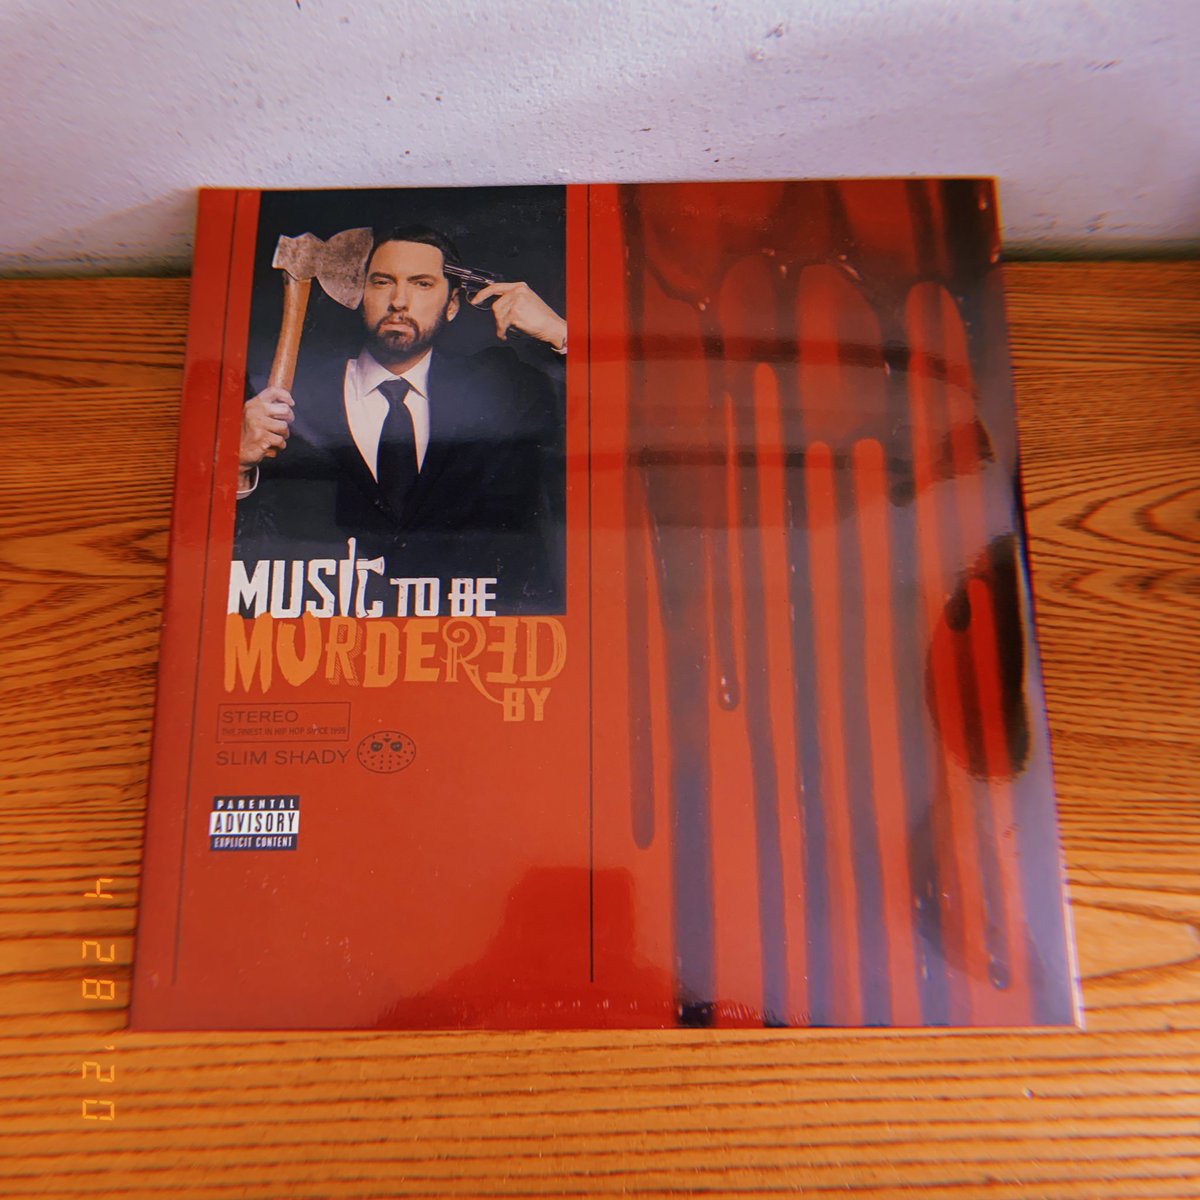 My “Music To Be Murdered By” vinyl finally arrived!! Thank you @Eminem @rosenberg @ShadyRecords 🚨🔥🎧
#Eminem #MusicToBeMurderedBy #HipHop #Rap #Music #Detroit #Vinyl #Collection #HipHopCollection